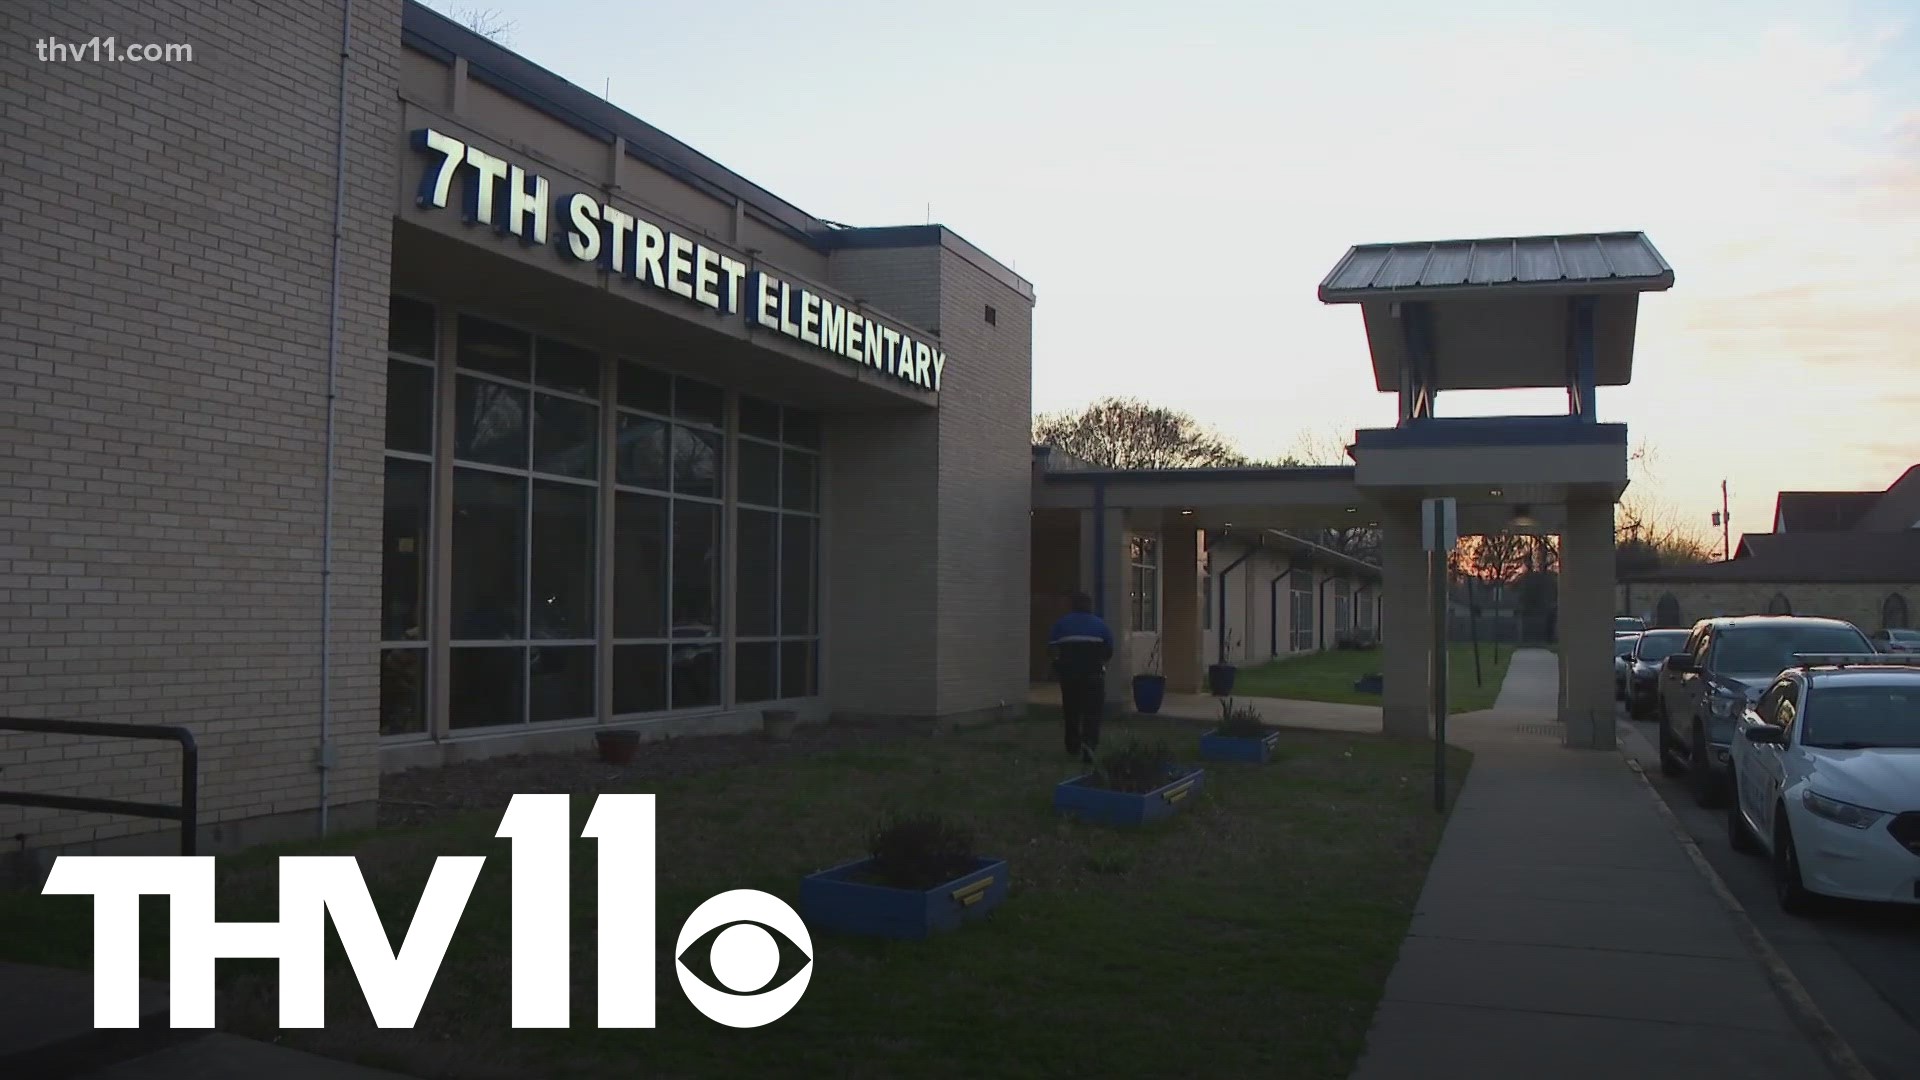 7th Street Elementary School in North Little Rock will see changes to its size and curriculum after a plan was approved just days after the March 31 tornado.